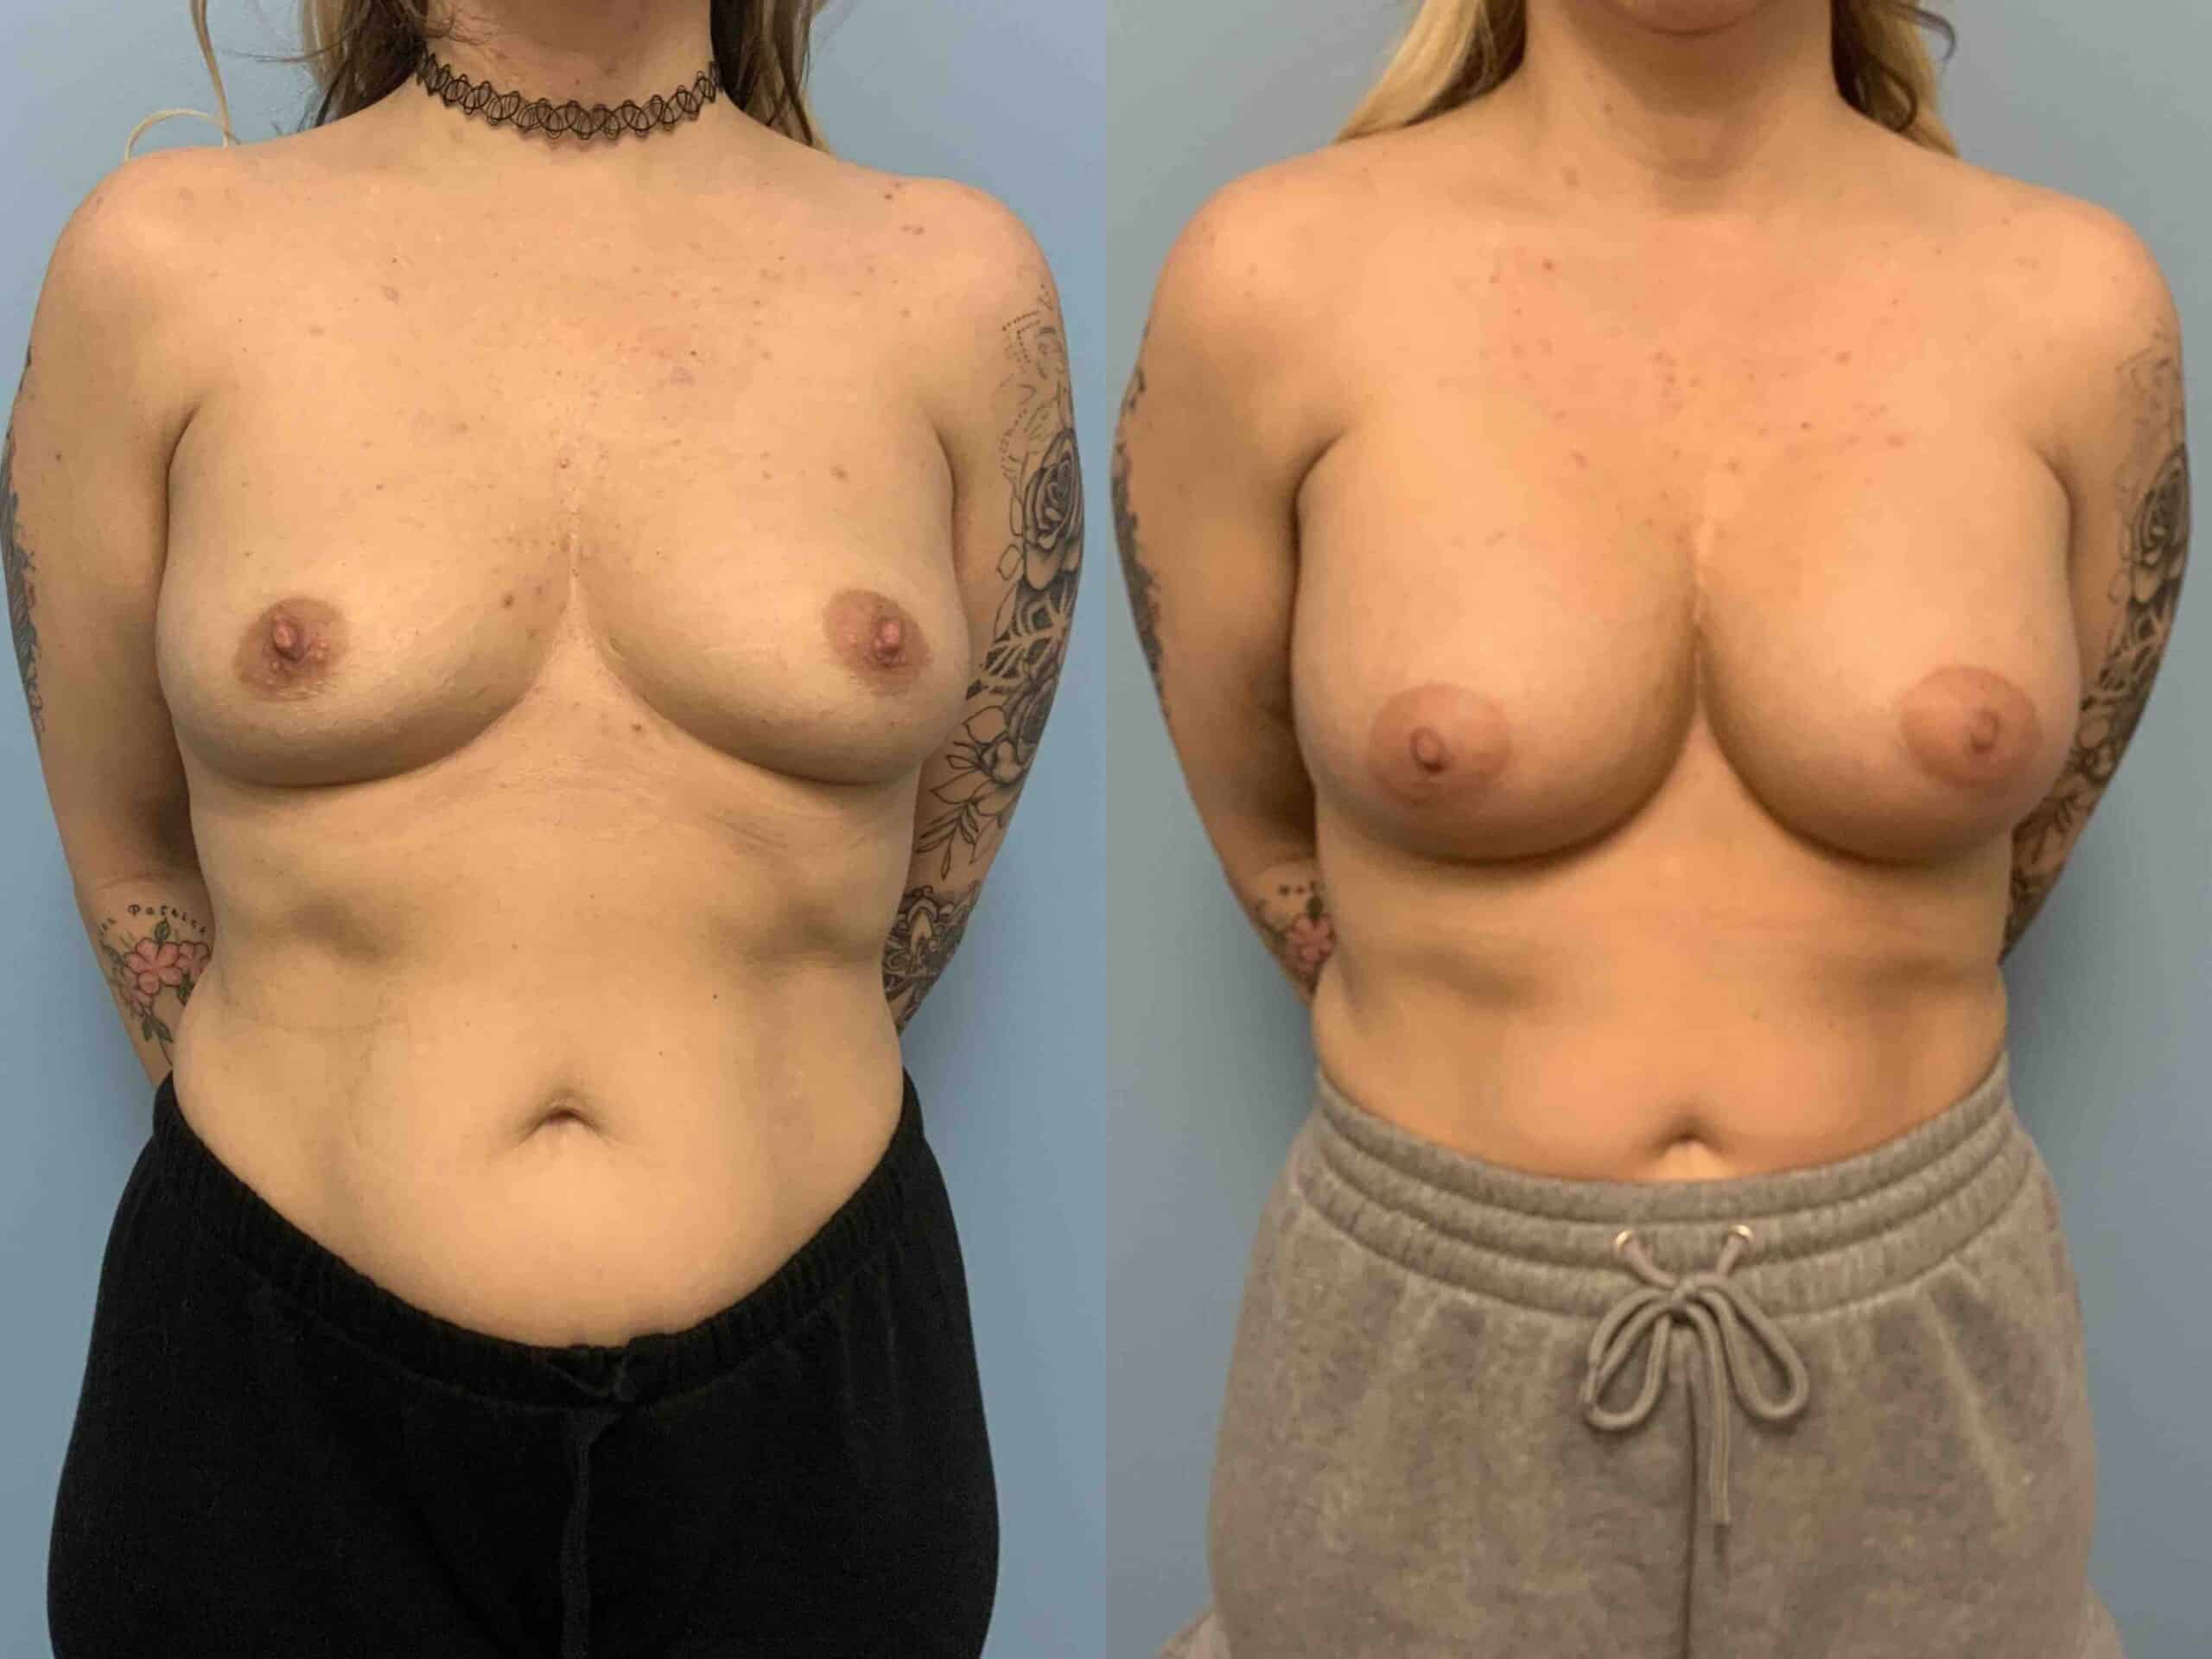 Before and after, 1 mo post op from Breast Augmentation, Level III Muscle Release performed by Dr. Paul Vanek (front view